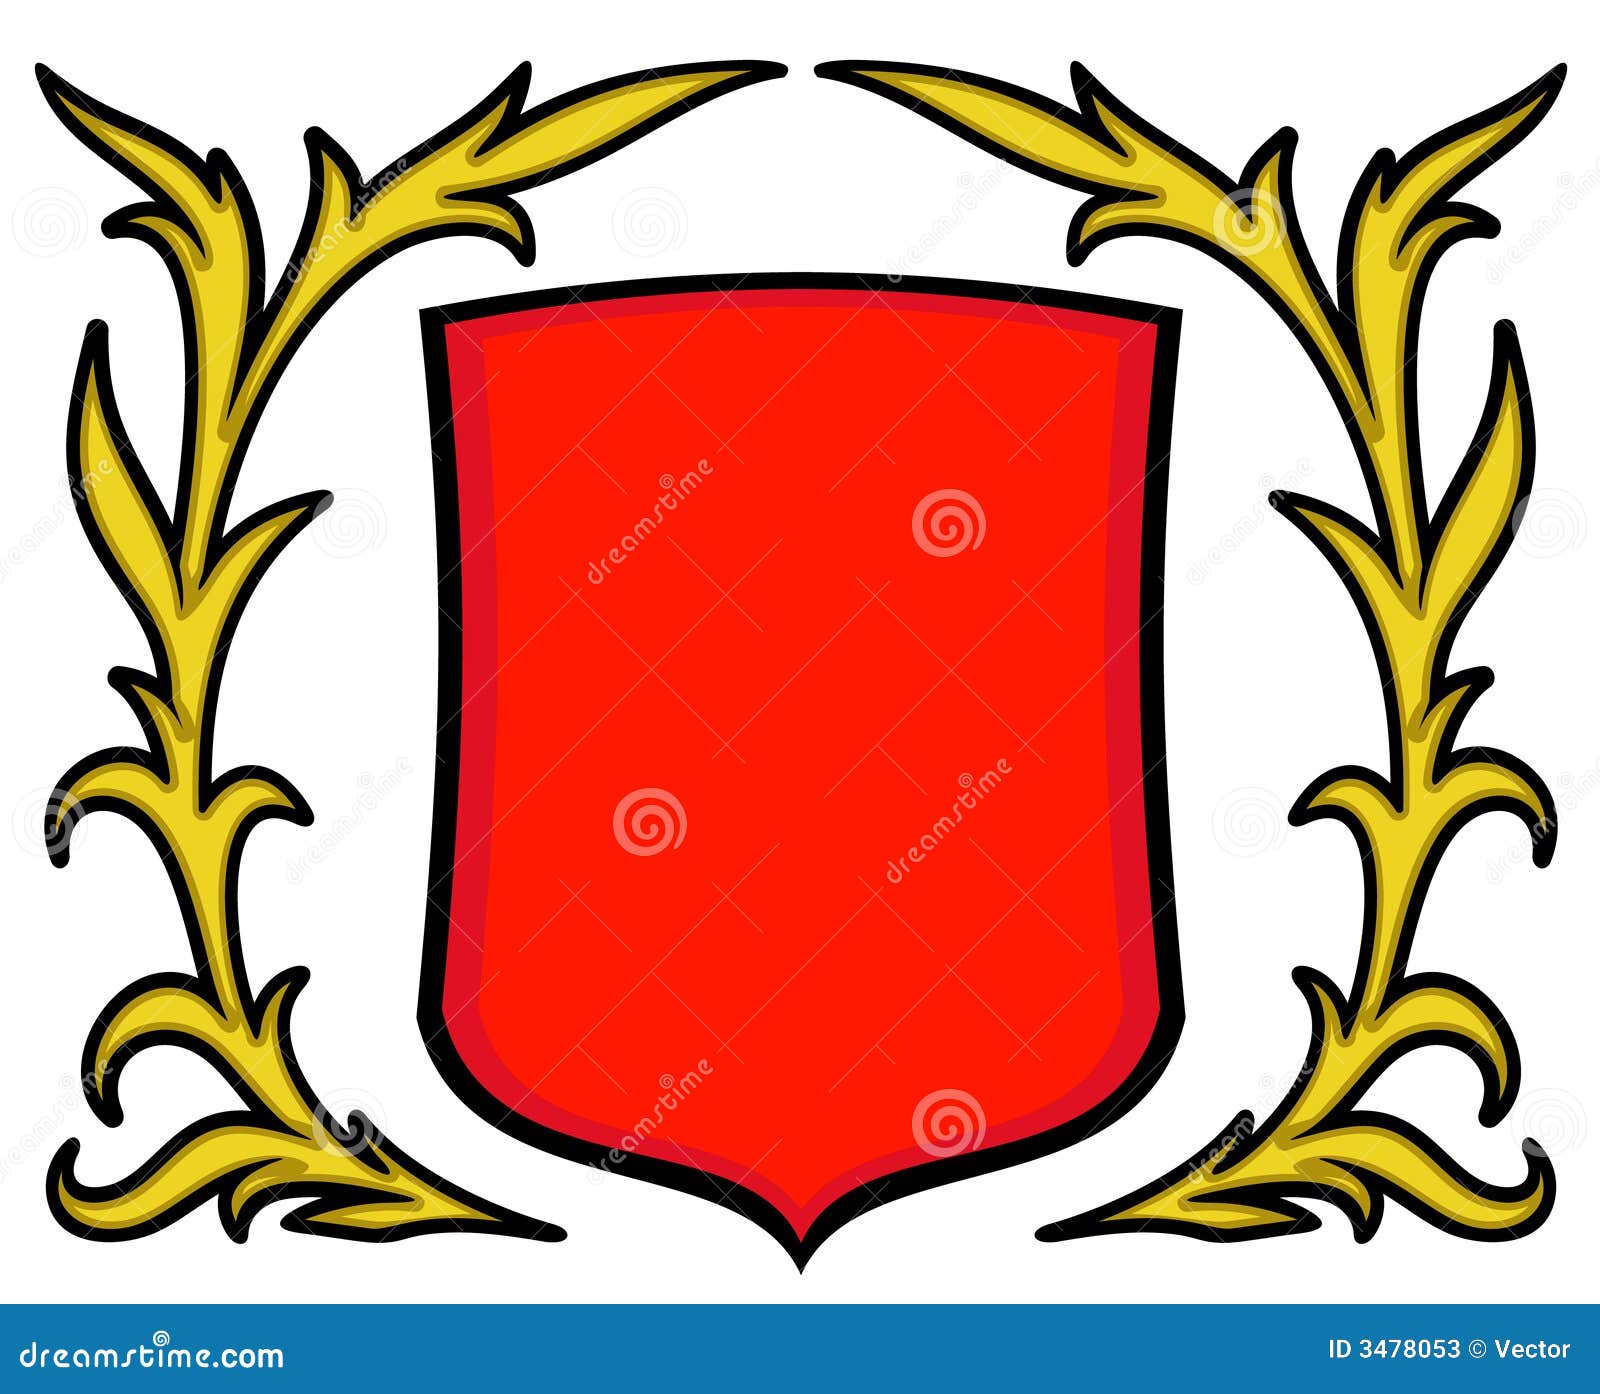 Vector Coat Of Arms Stock Photos - Image: 3478053